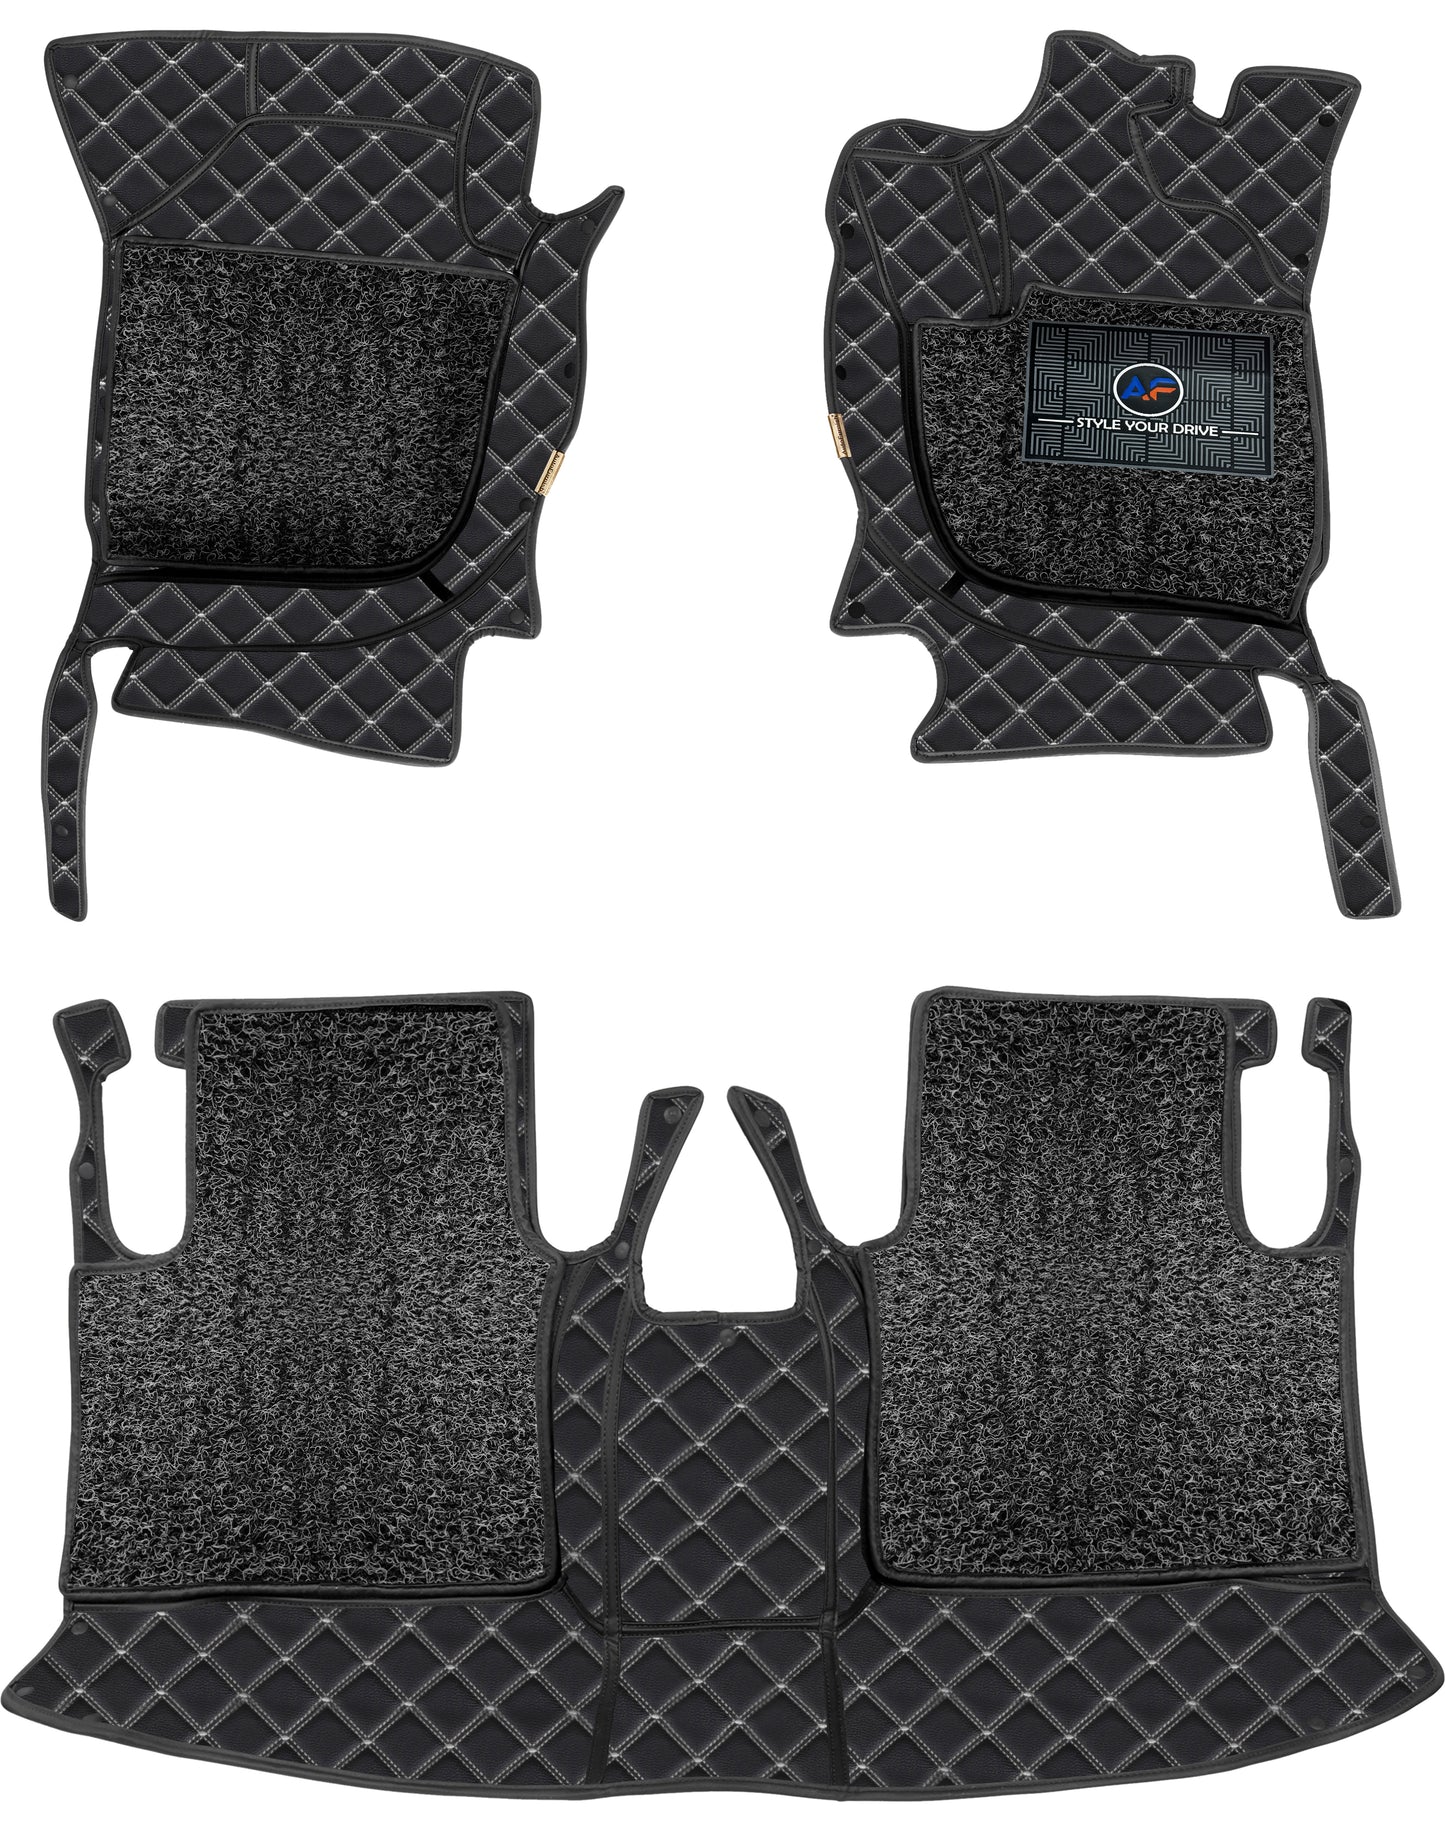 7d-luxury-car-footmats-for-maruti-ritz-2009-2016-custom-designed-pu-leather-with-7-layer-depth-24mm-2-rows